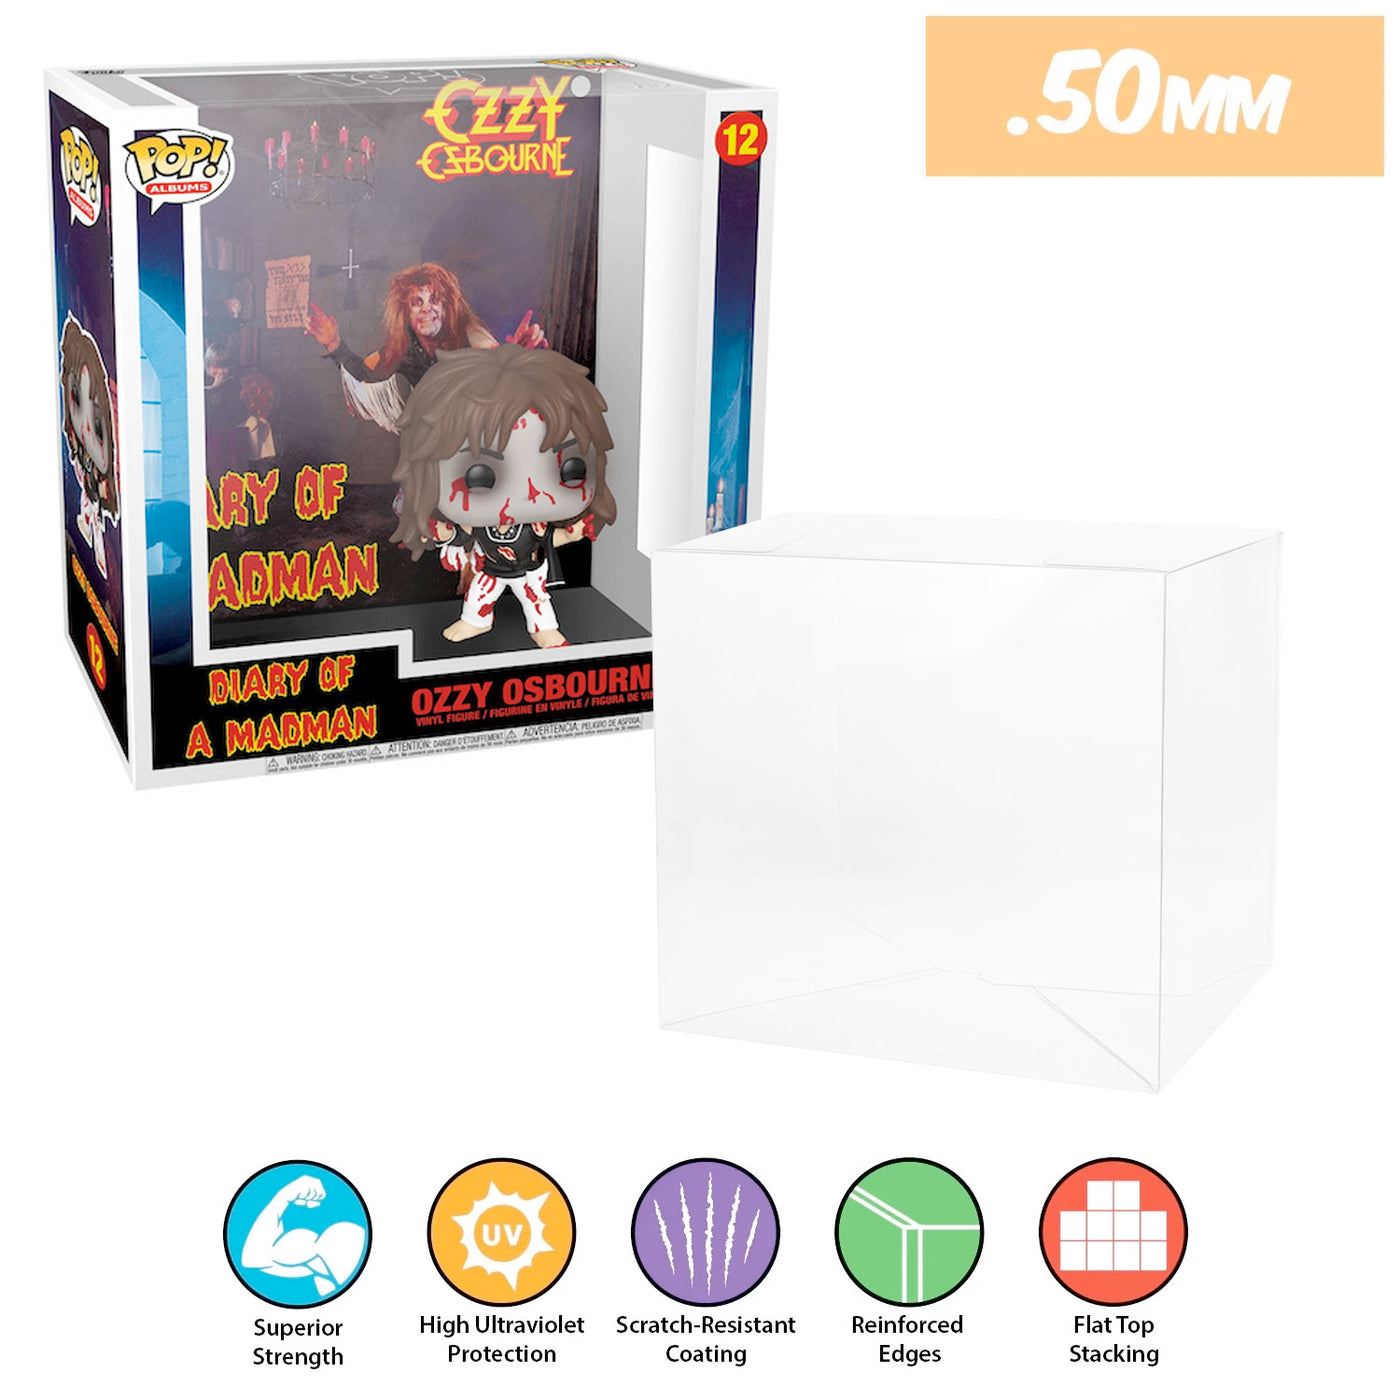 12 ozzy osbourne diary pop albums best funko pop protectors thick strong uv scratch flat top stack vinyl display geek plastic shield vaulted eco armor fits collect protect display case kollector protector